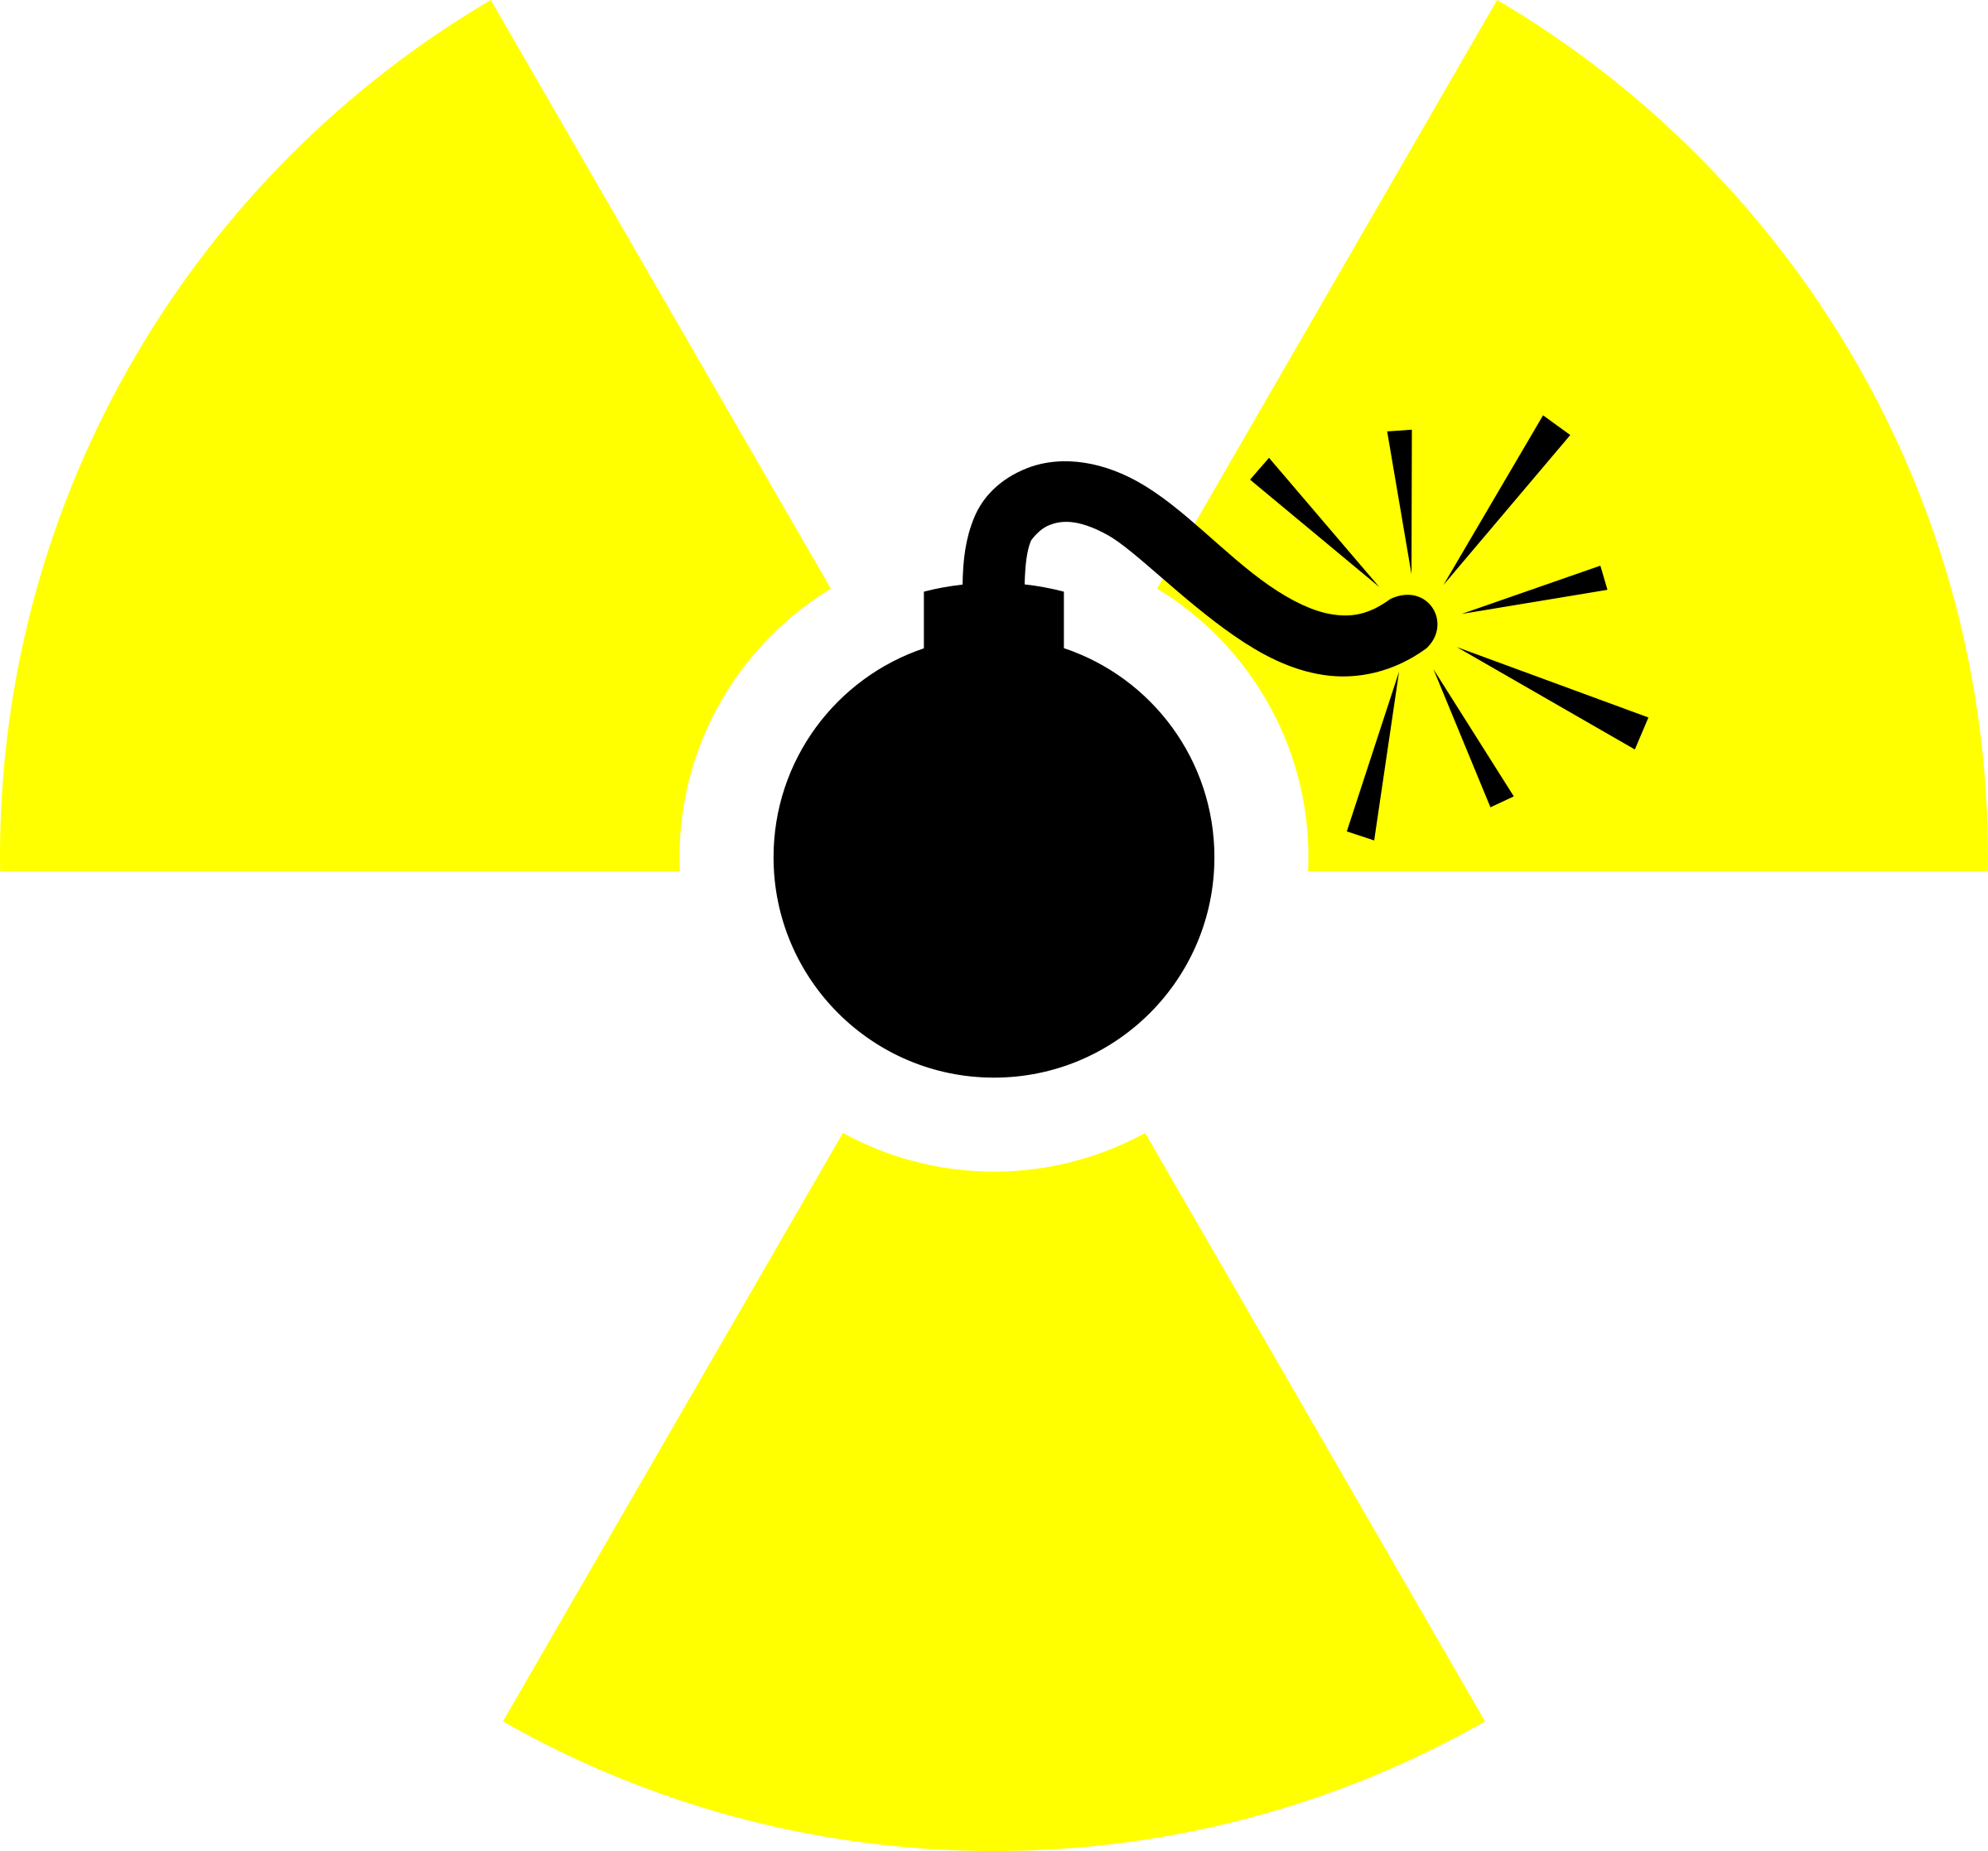 Free Nuclear War Cliparts, Download Free Clip Art, Free Clip